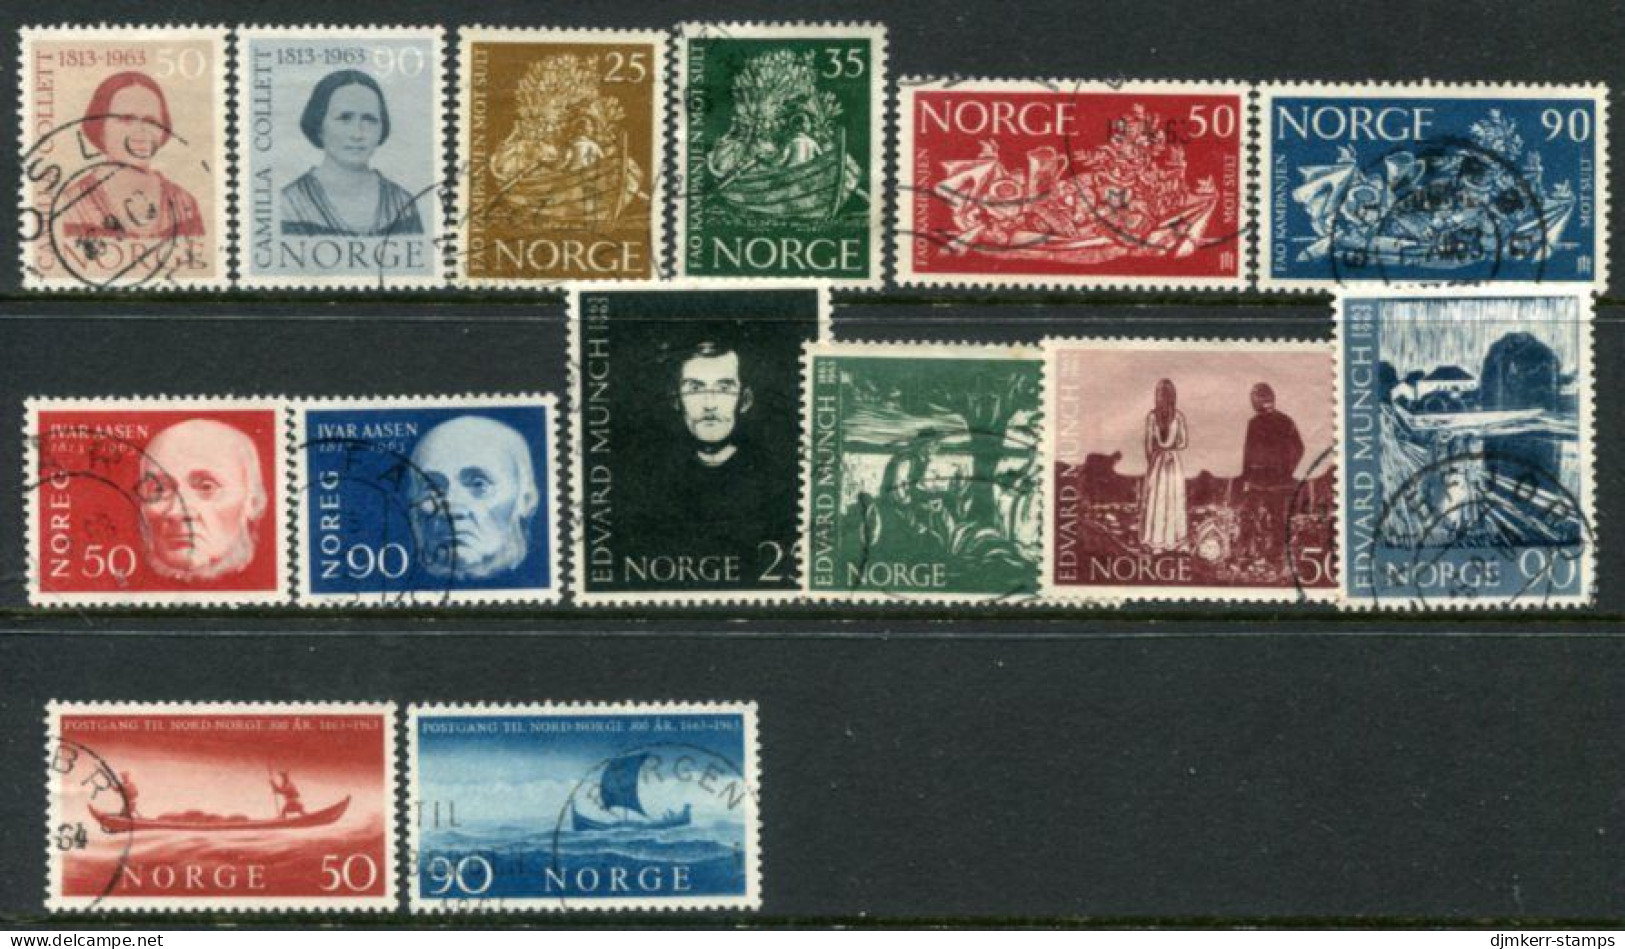 NORWAY 1963 Five Issues Used. - Usados